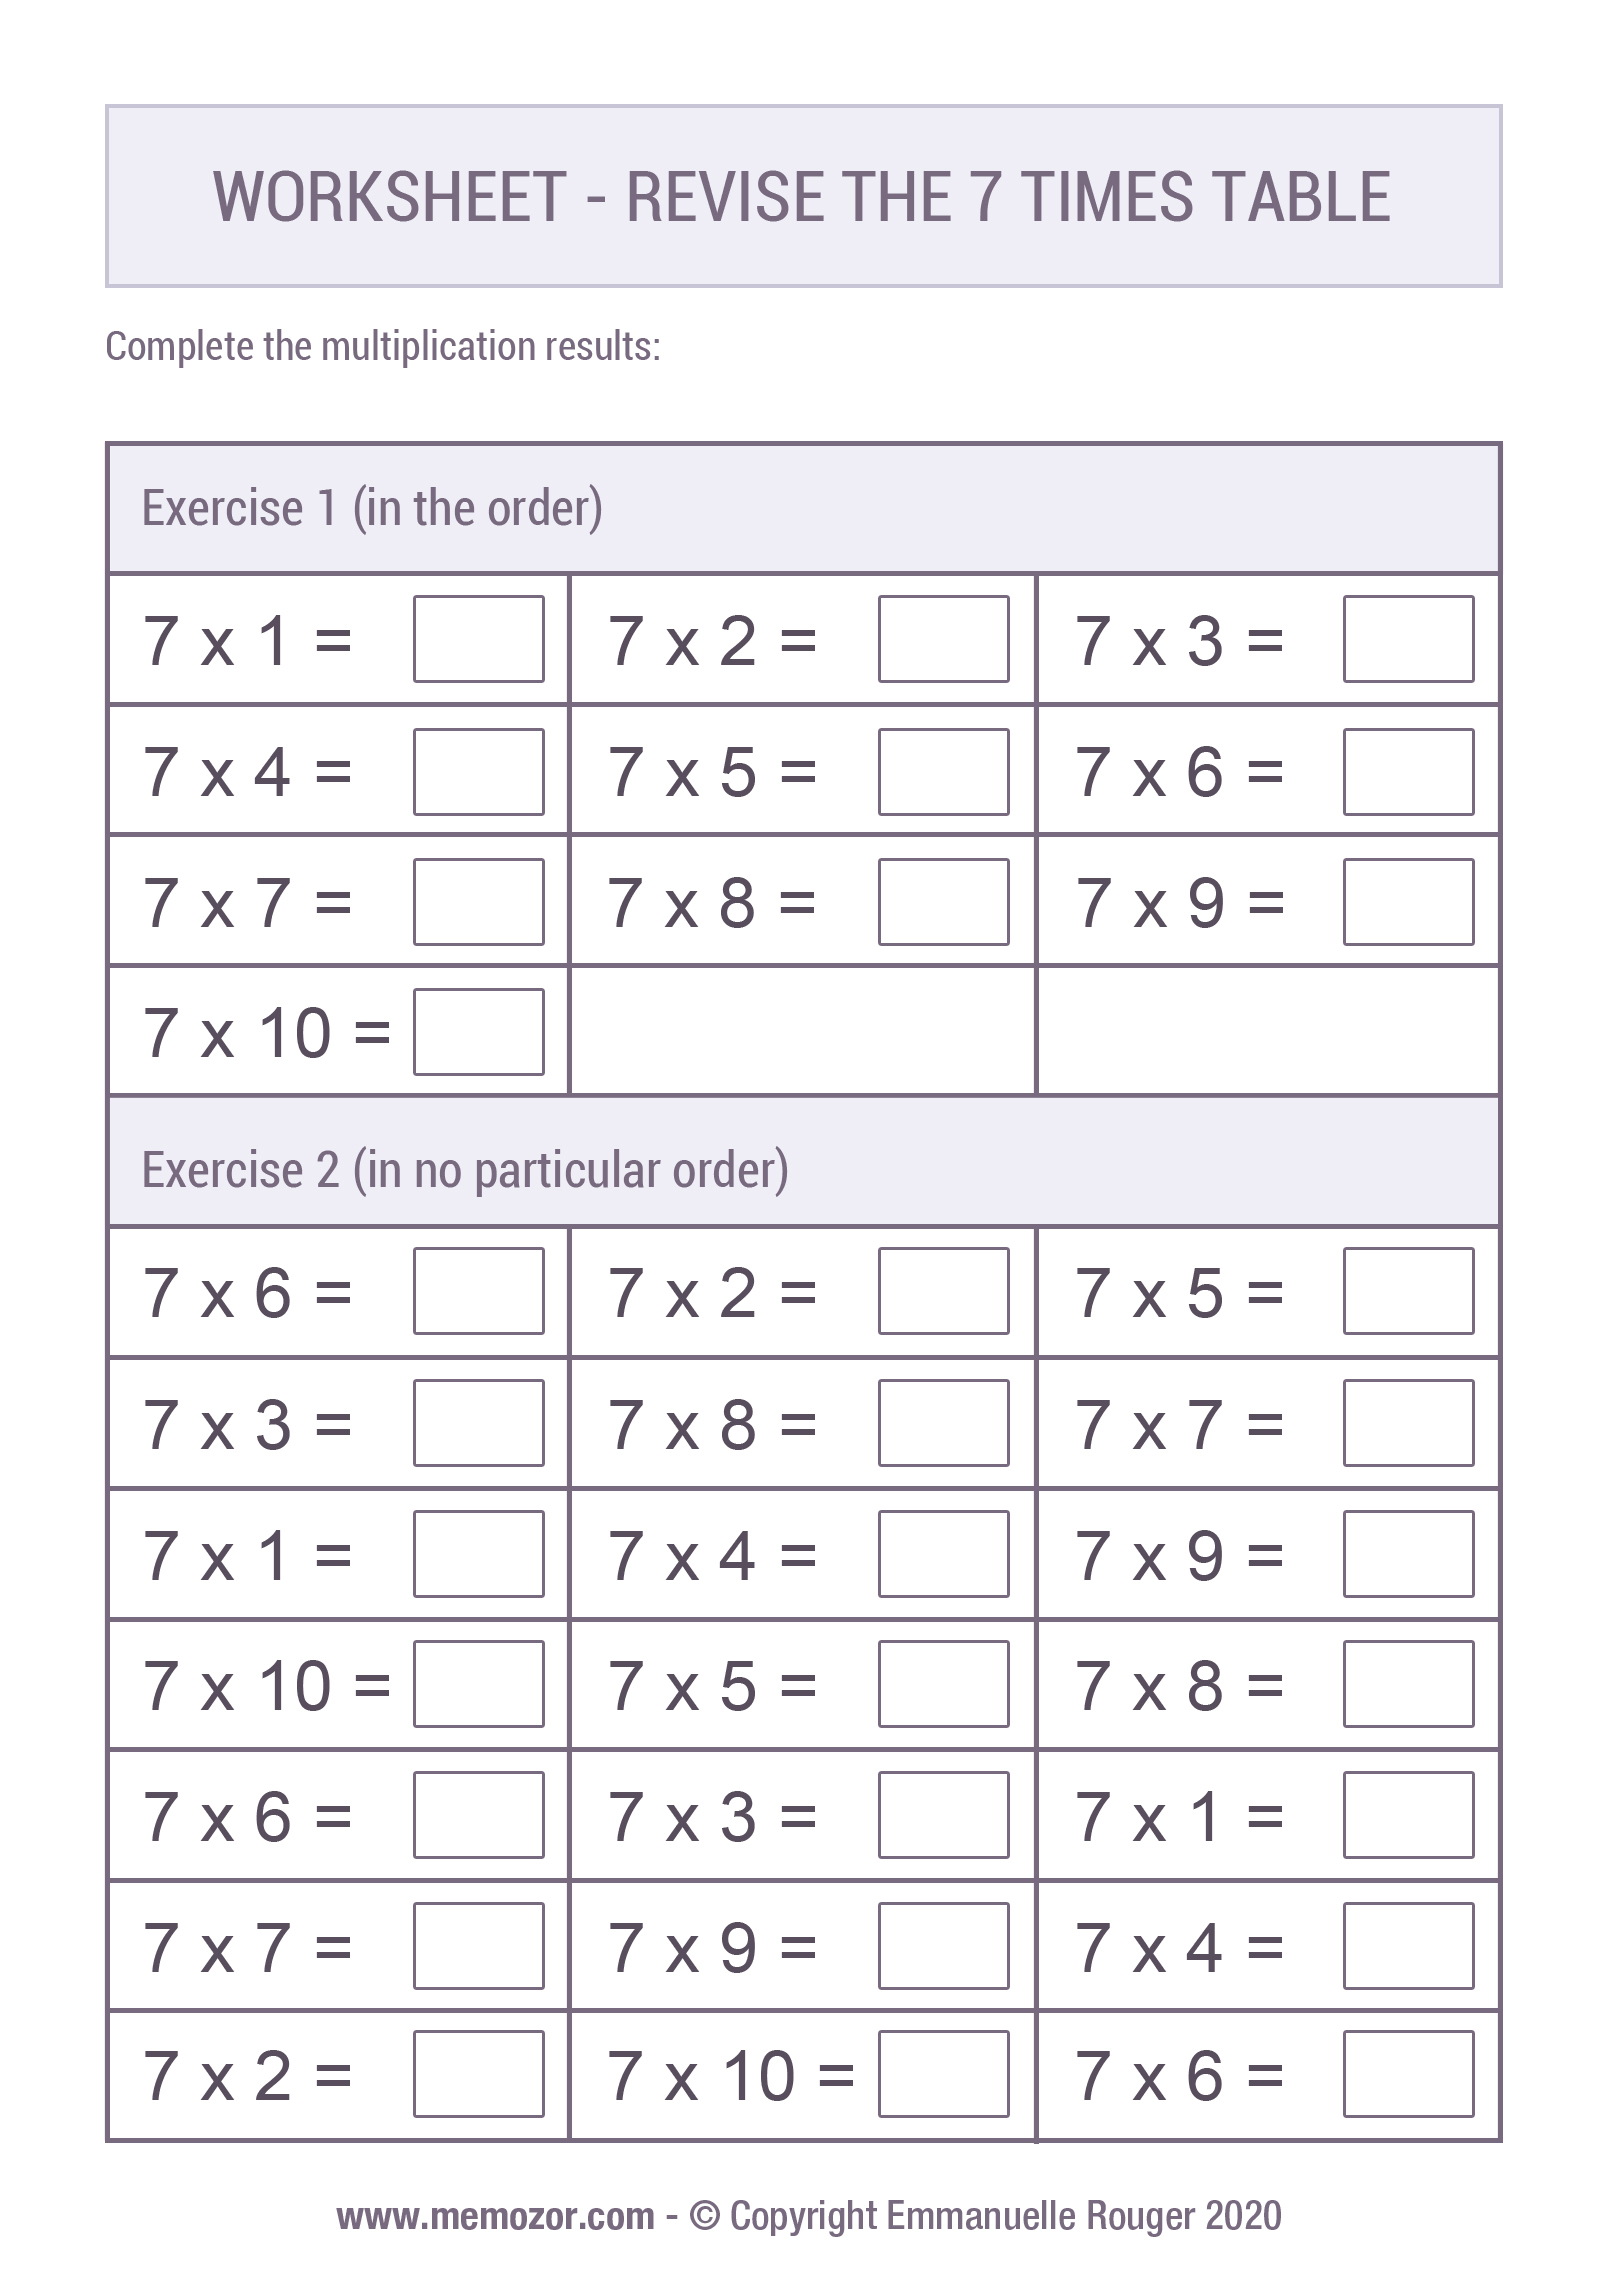 multiplication-worksheets-multiplication-facts-for-2-times-tables-1d3